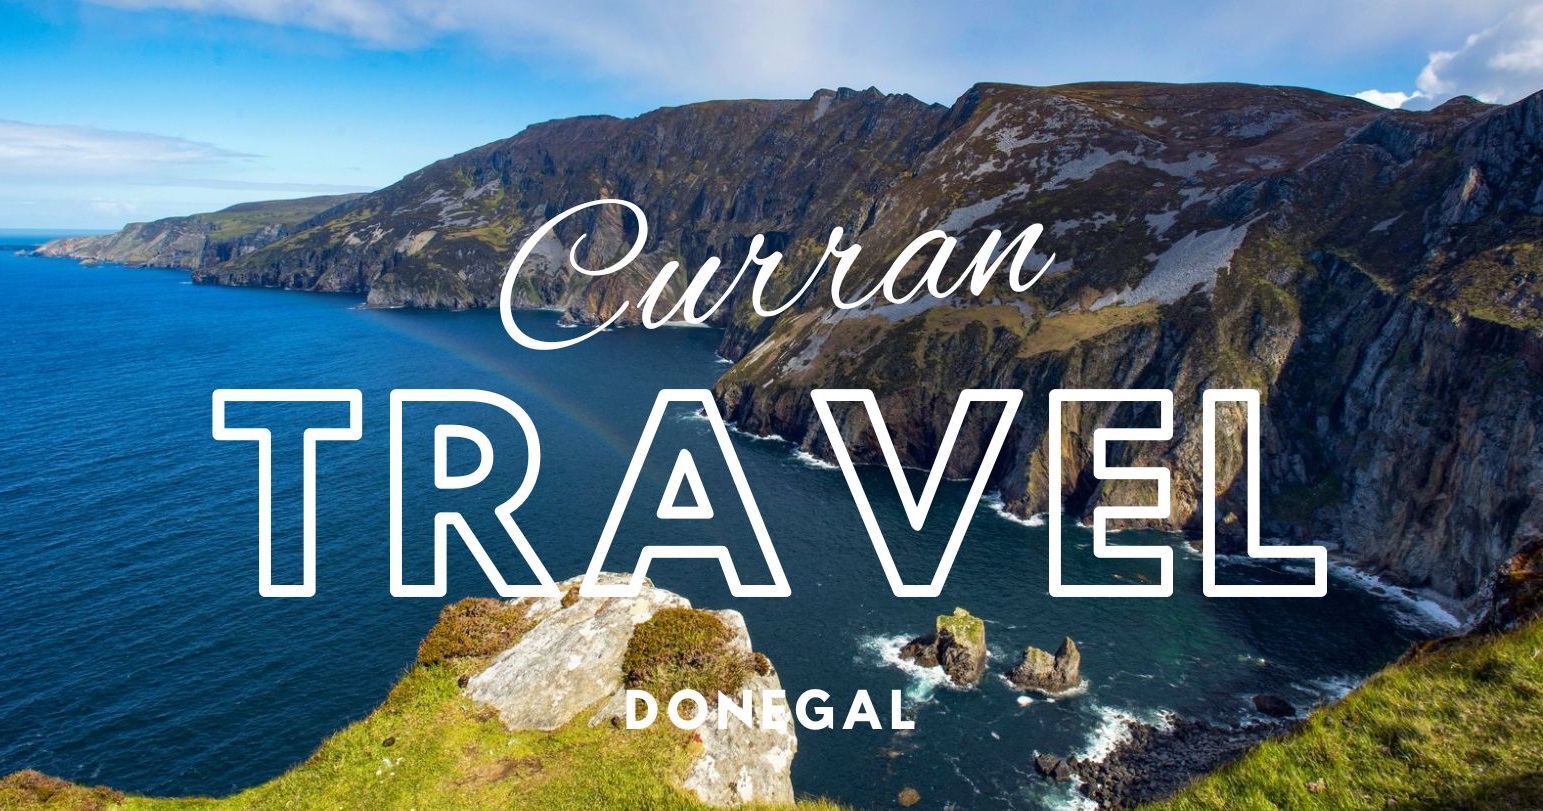 Curran Travel Donegal